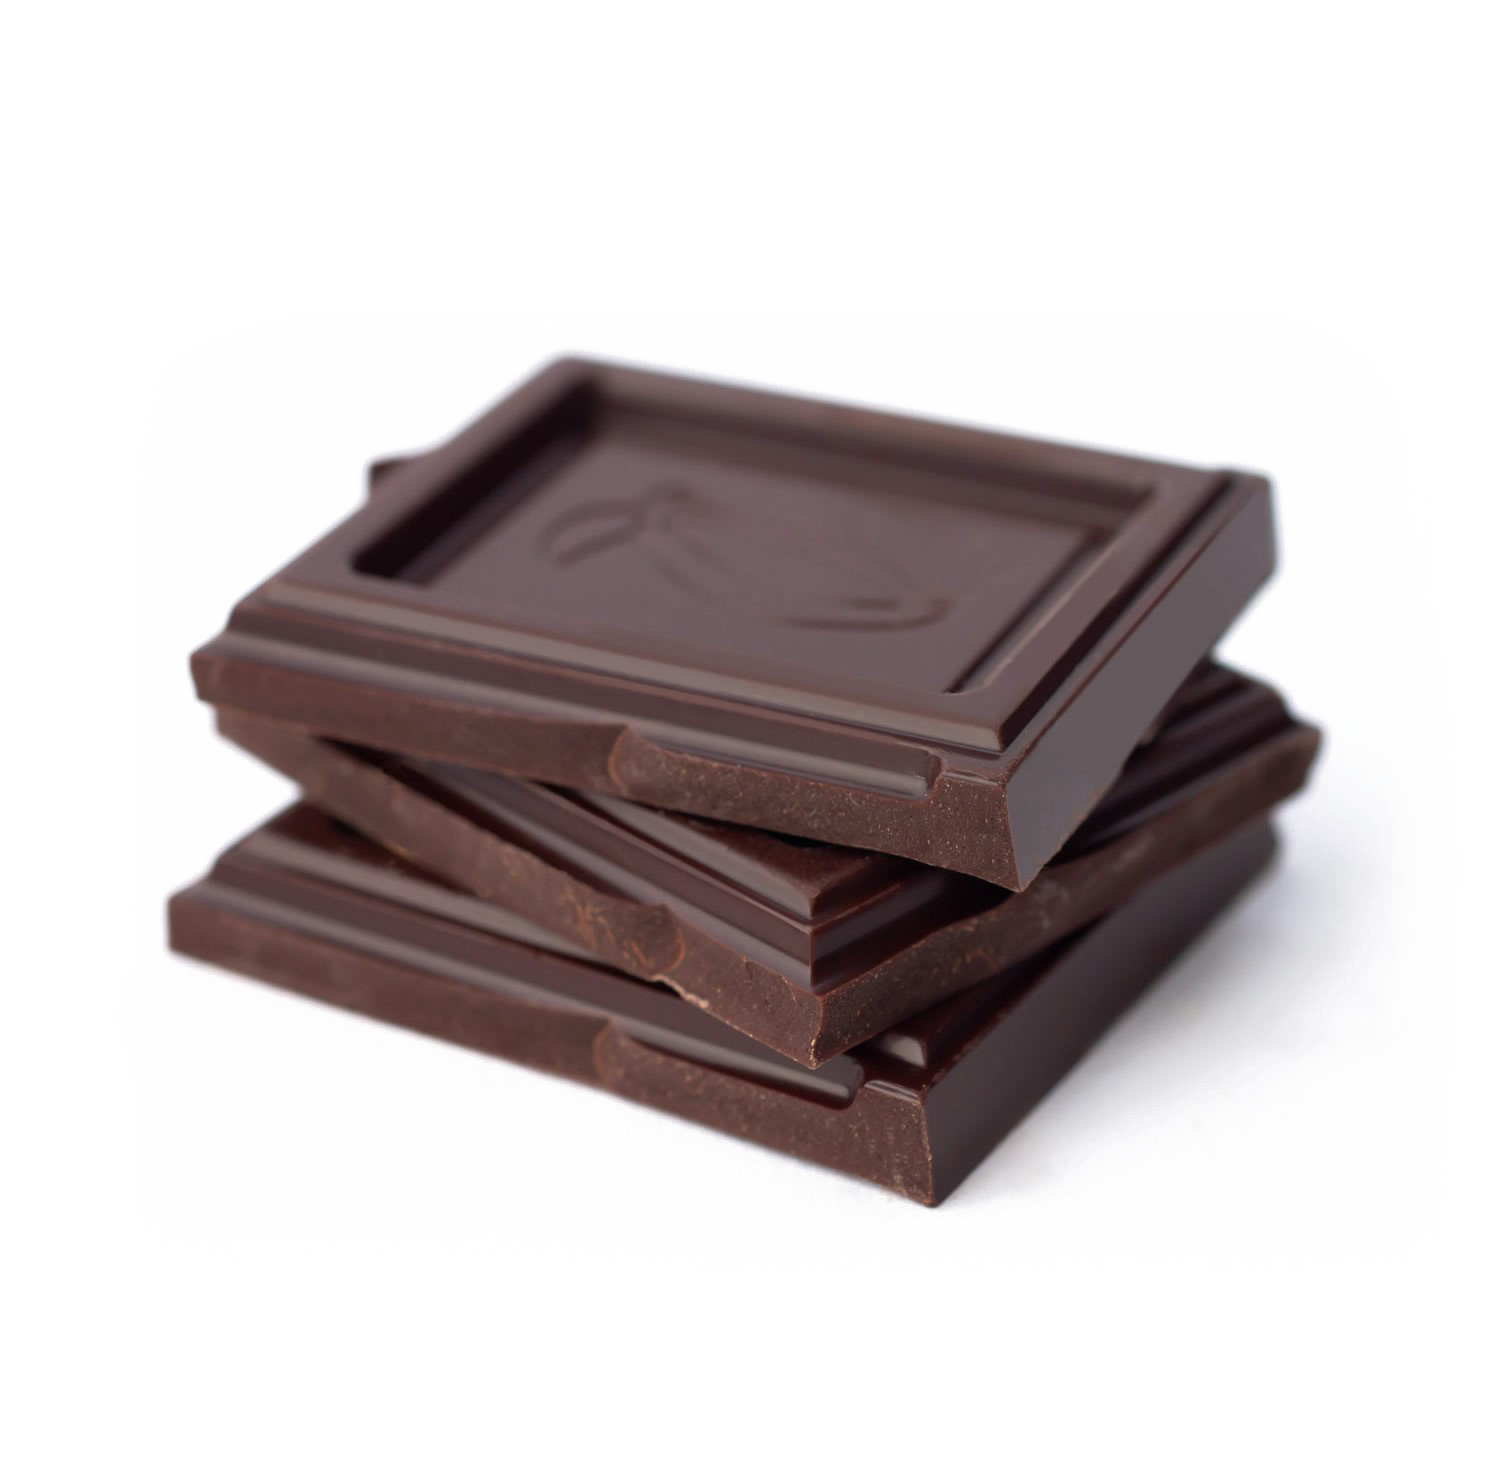 Donkere chocolade PNG Beeld Transparant